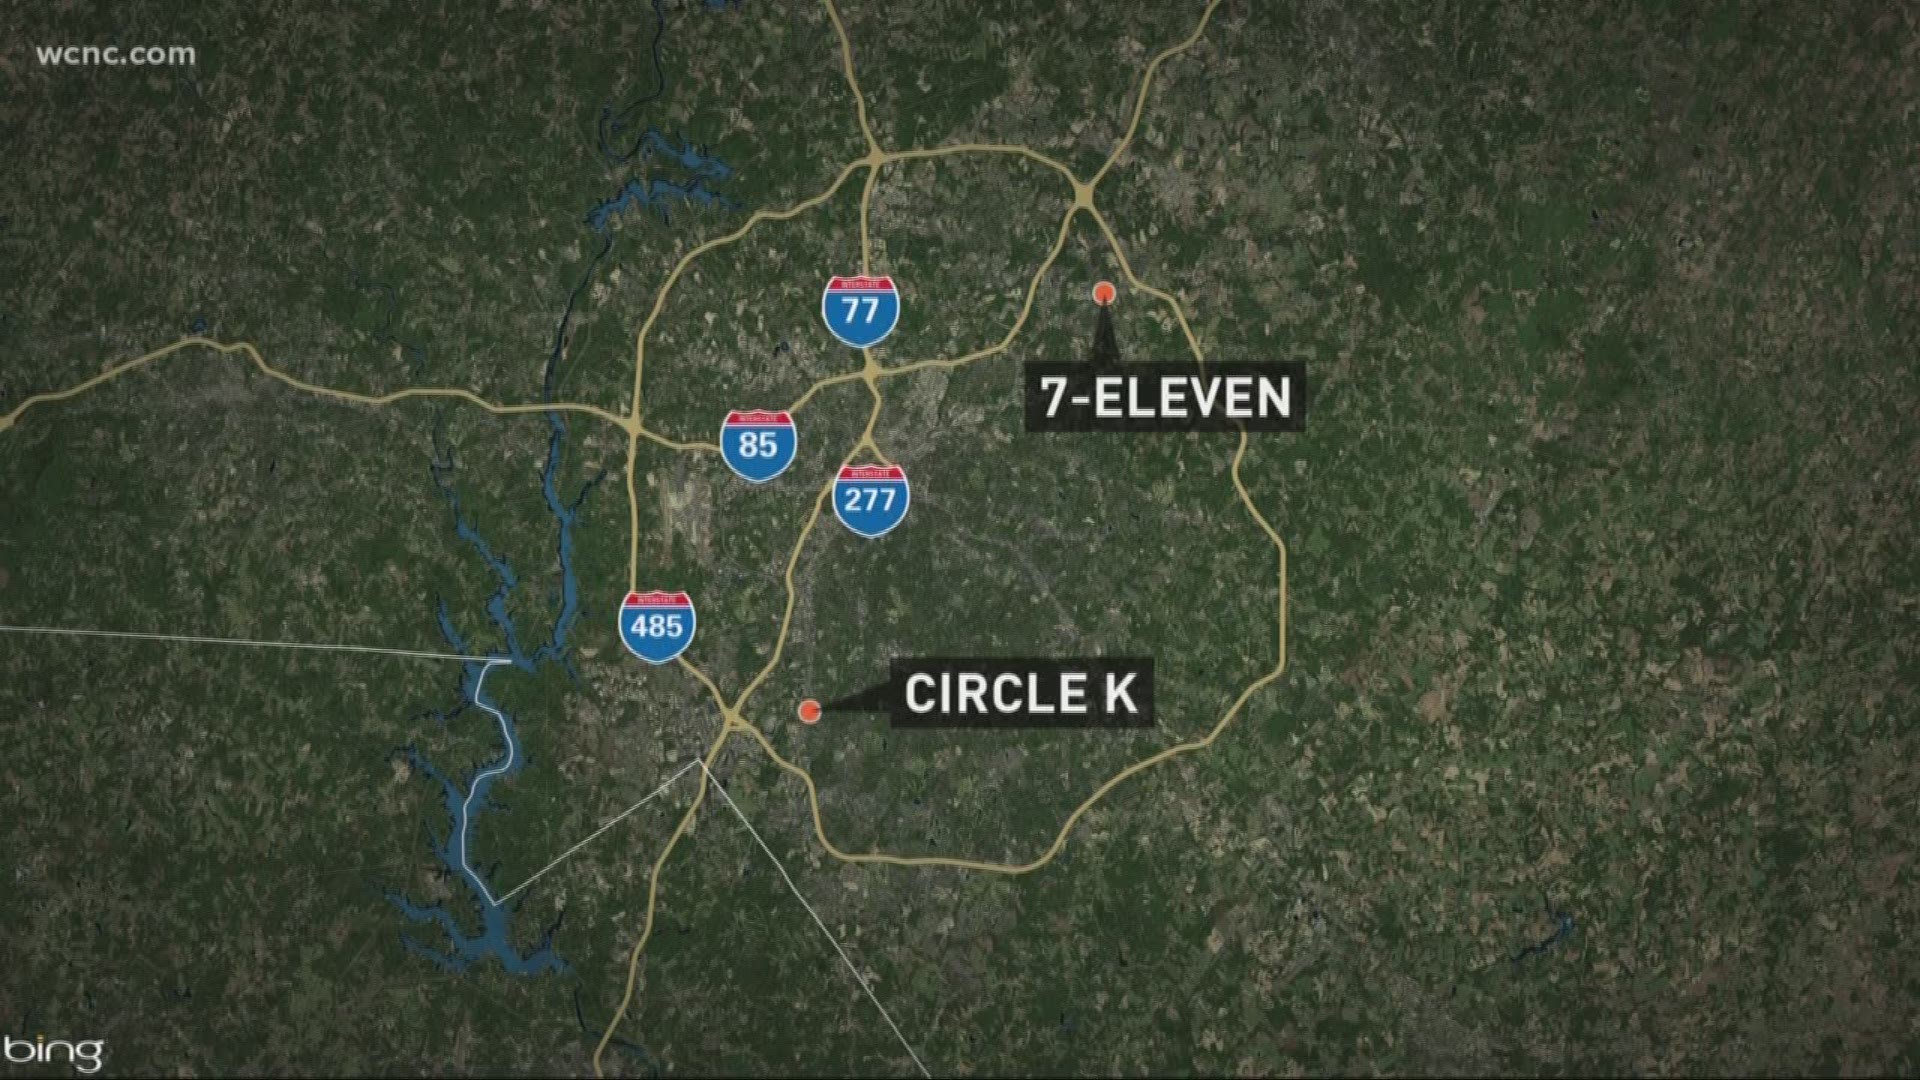 Two convenience stores were robbed overnight in Charlotte.